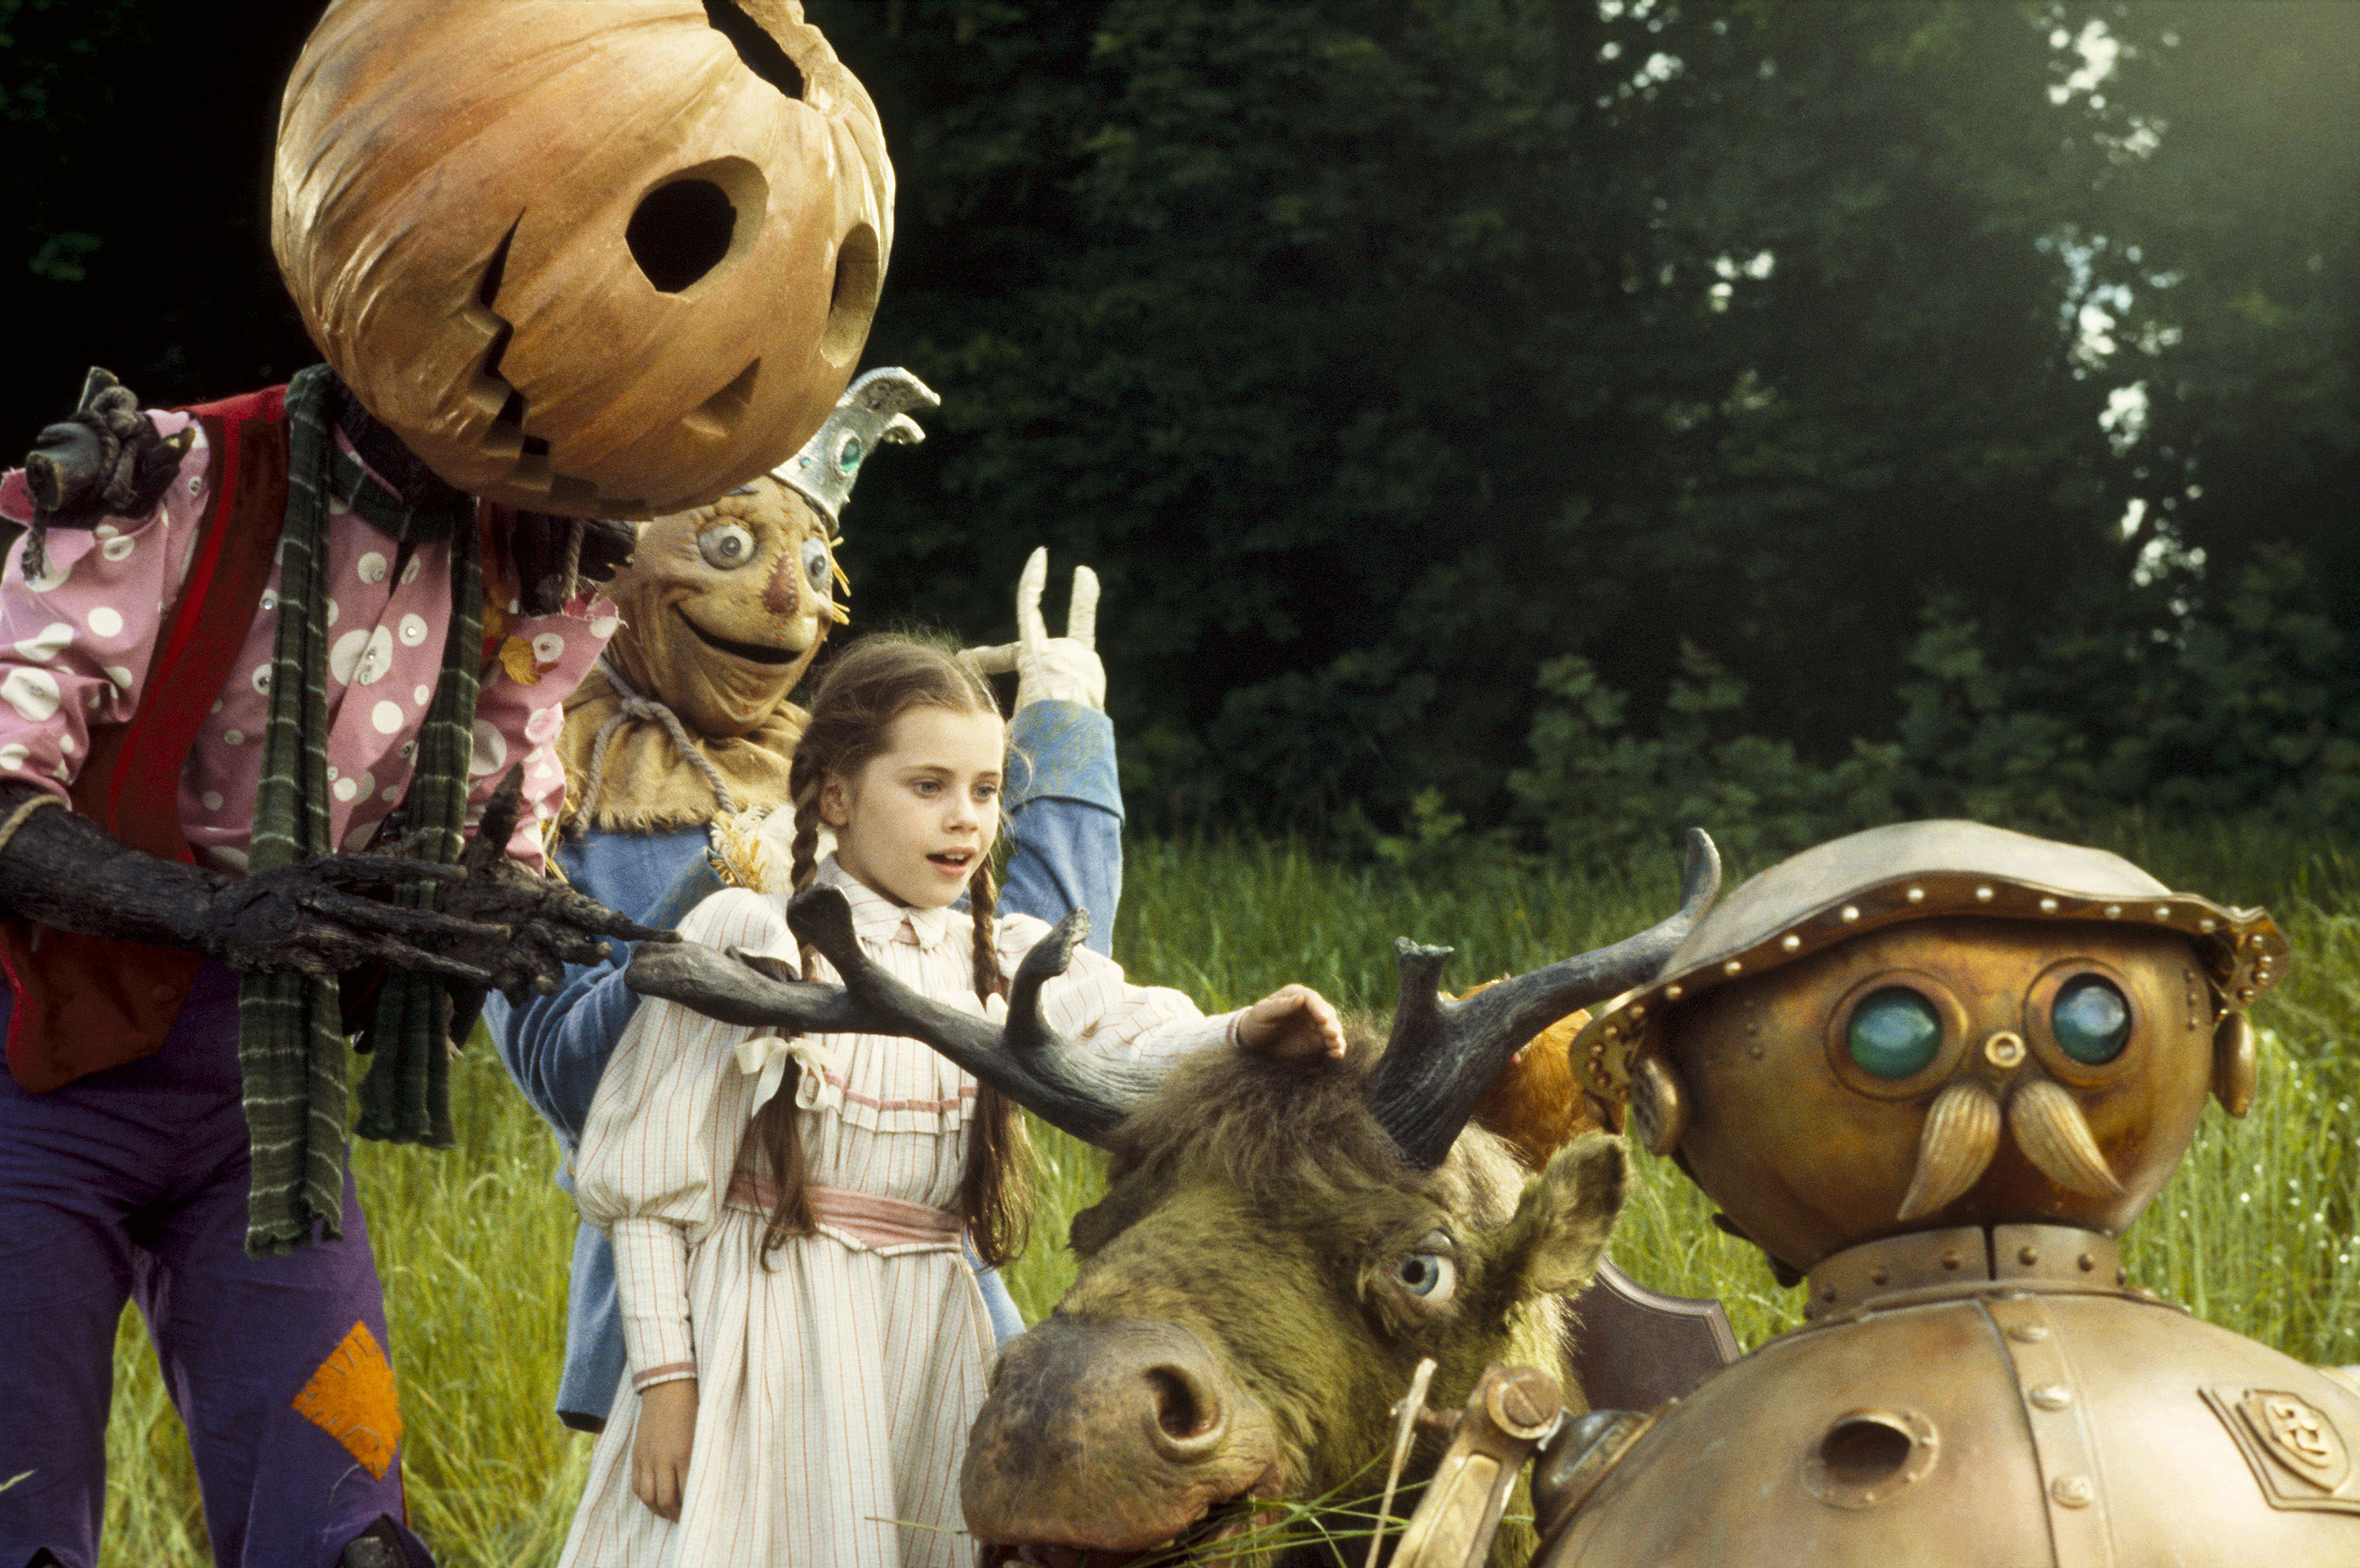 A young girl stands with a scarecrow, a pumpkin man, and a robot